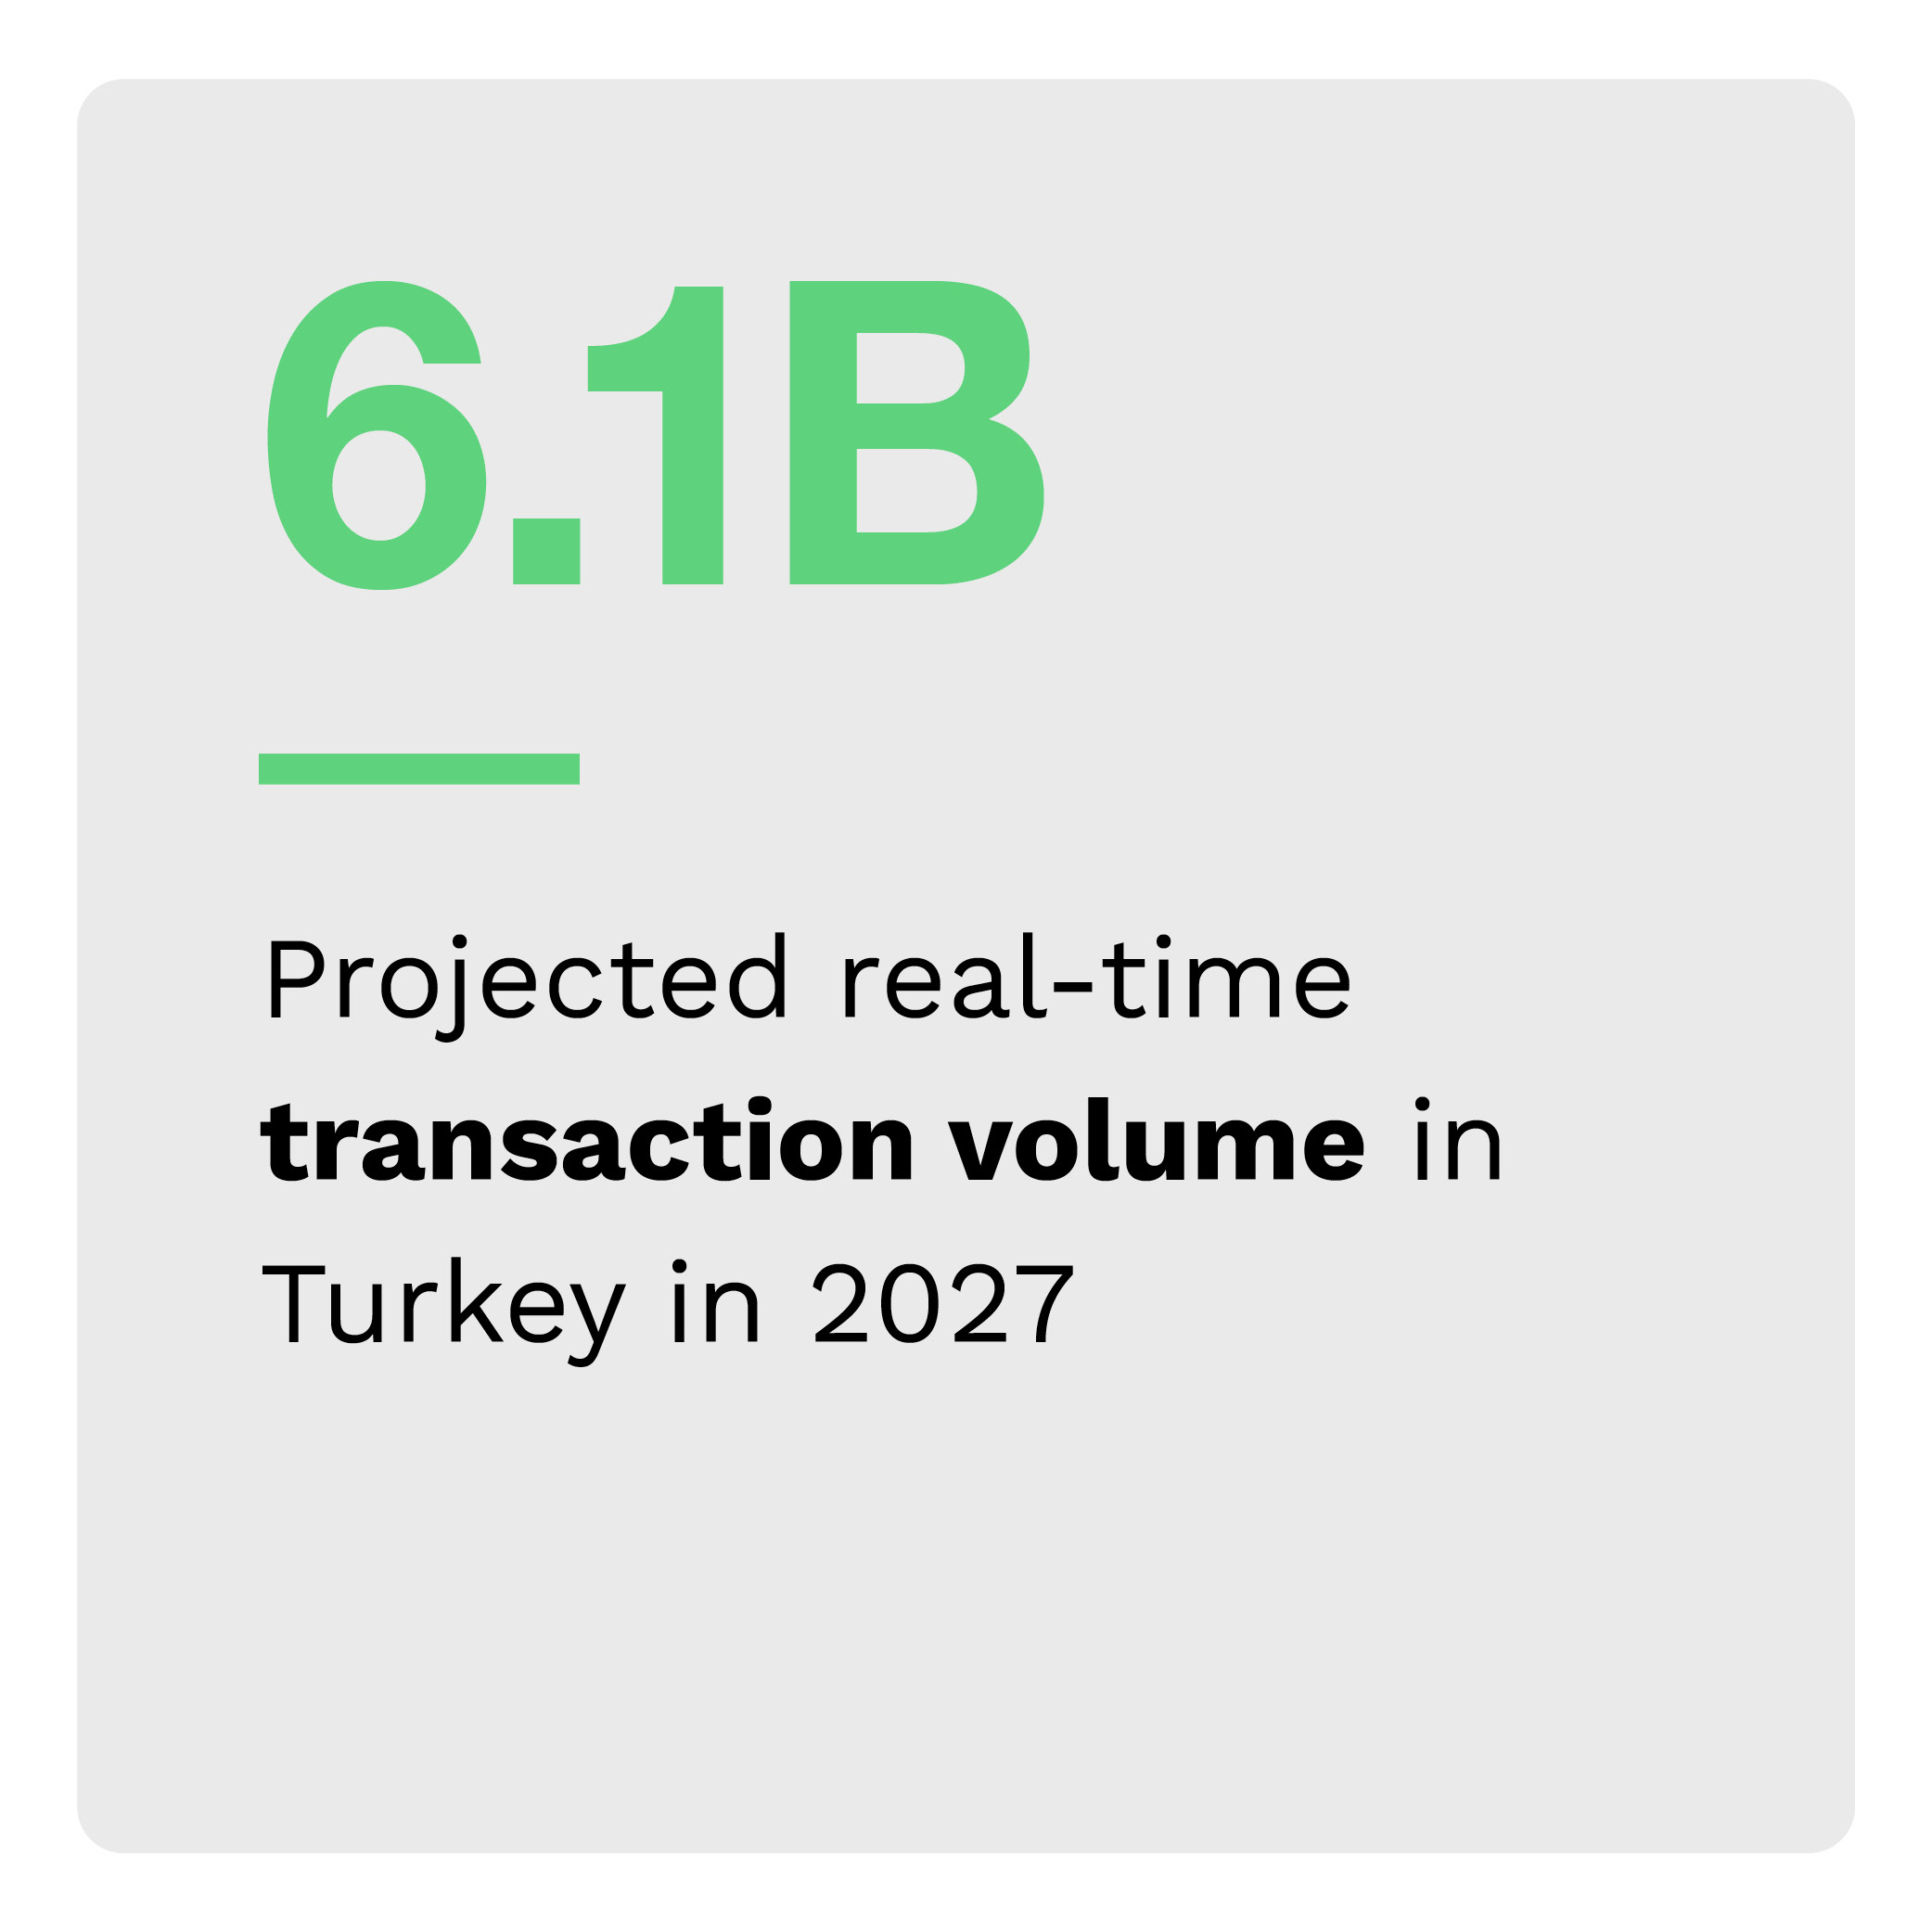 6.1B: Projected real-time transaction volume in Turkey in 2027